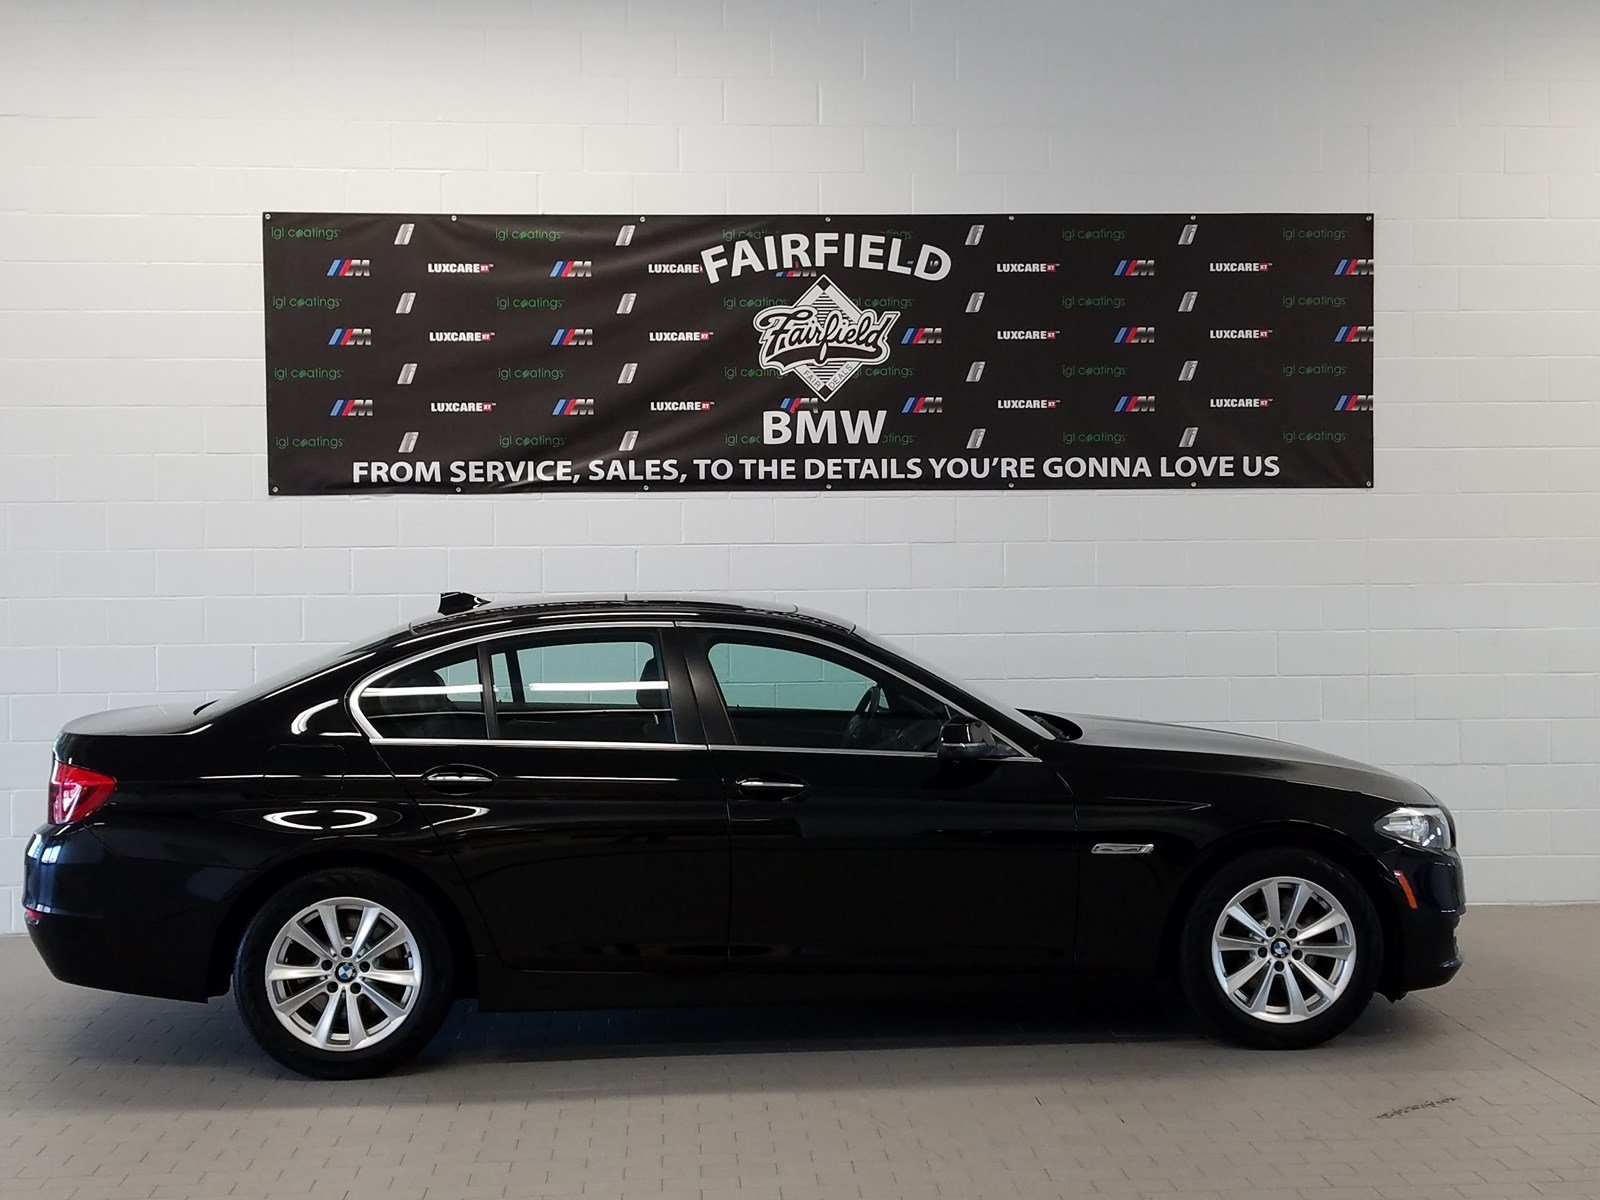 New 2014 BMW 528i xDrive For Sale at Fairfield Ford of 